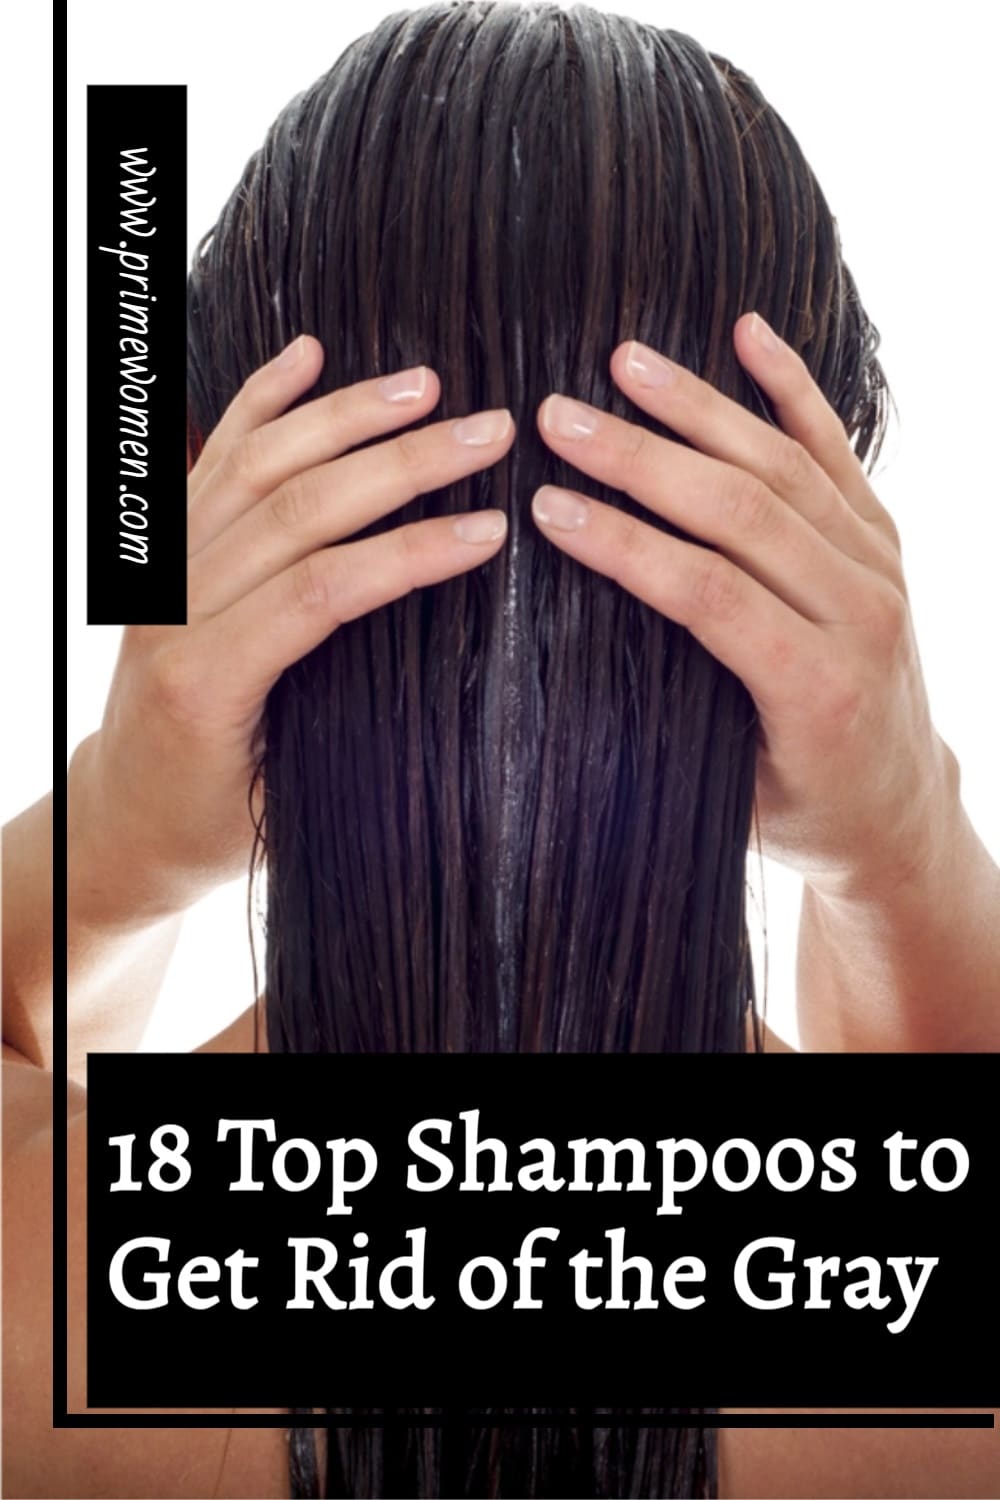 18-Top-Shampoos-to-Get-Rid-of-the-Gray